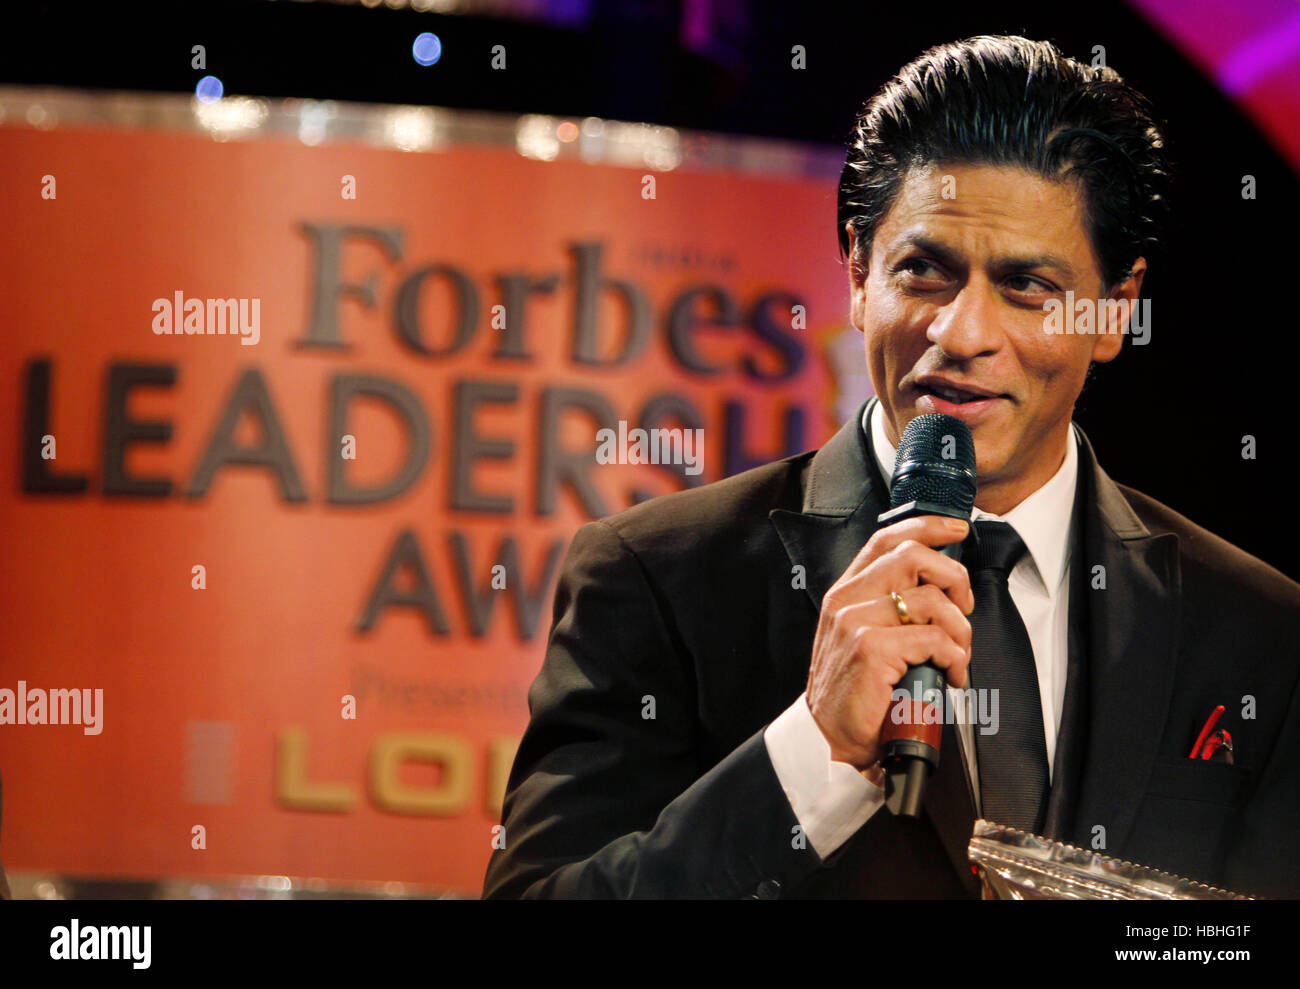 Shahrukh Khan, Indian Bollywood actor, speaking on microphone at Forbes Leadership Awards in Mumbai, India Stock Photo